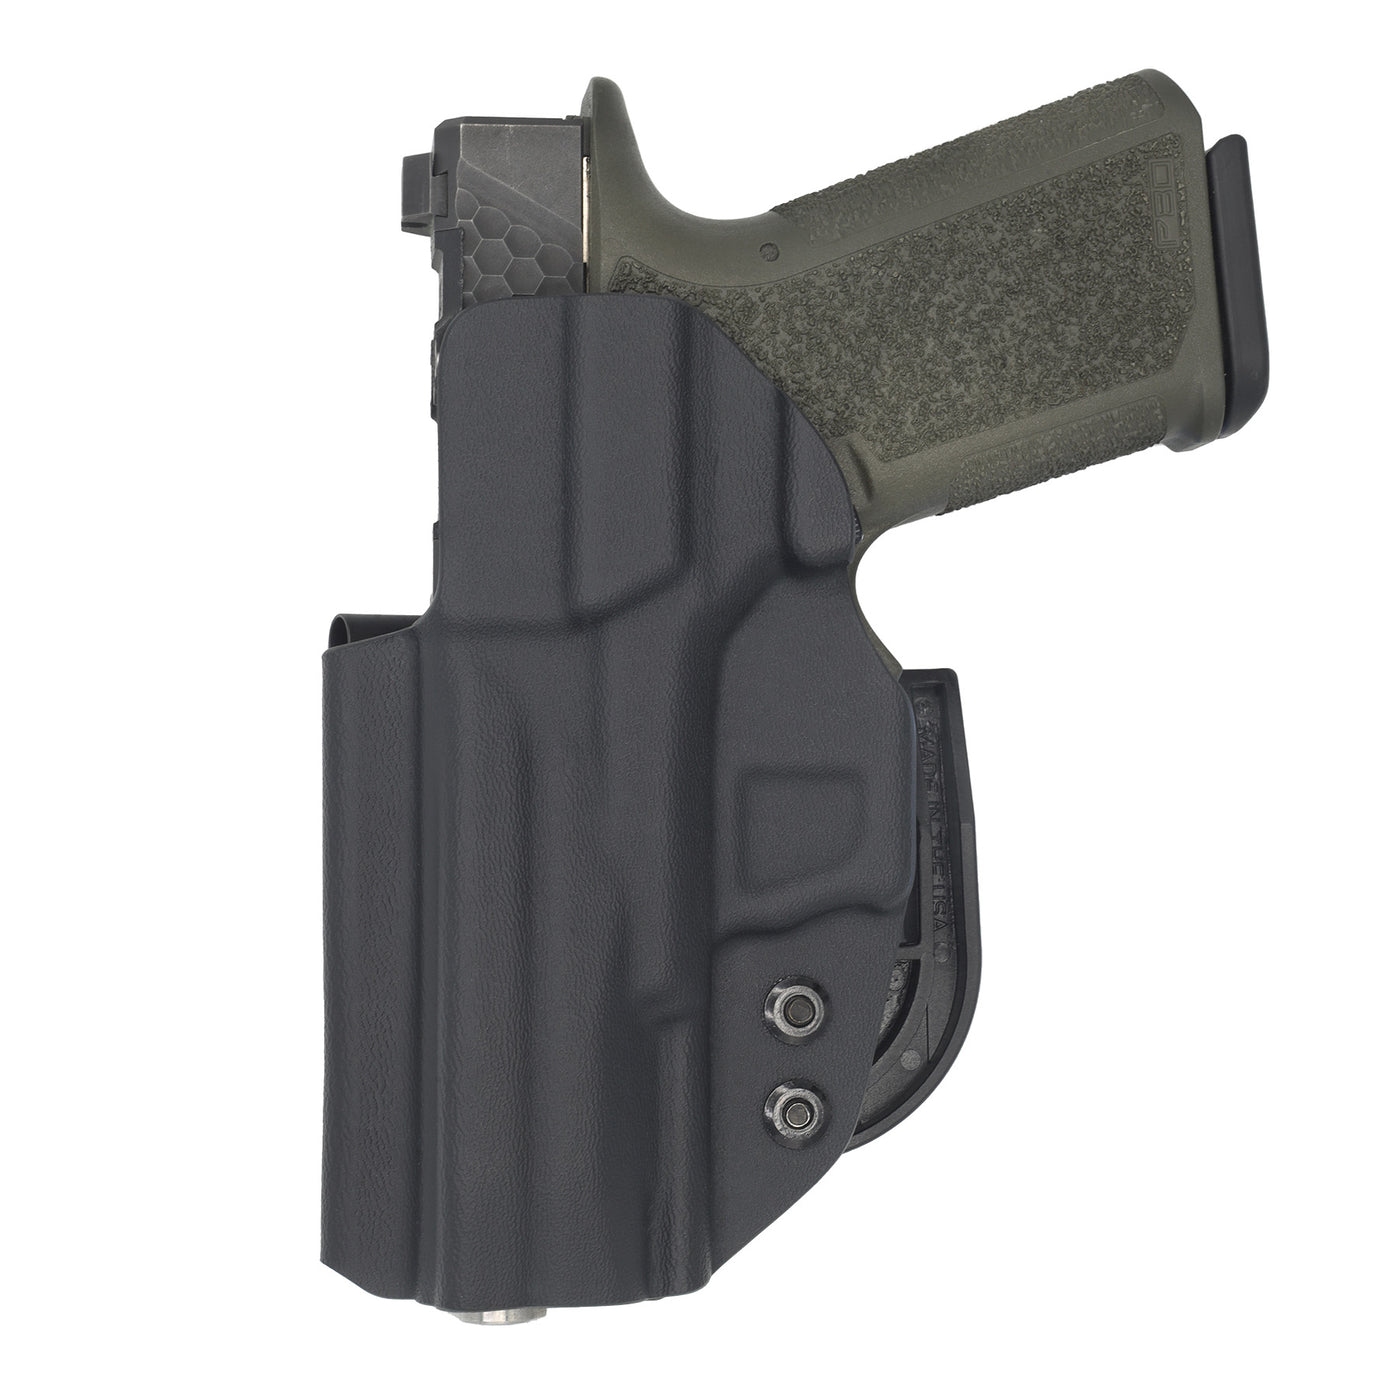 This is the back of the Alpha upgrade C&G Holsters Polymer 80 PF940c Inside the waistband (IWB) Kydex holster using the darkwing claw and Discreet Carry Concepts MOD4 shorty clips.